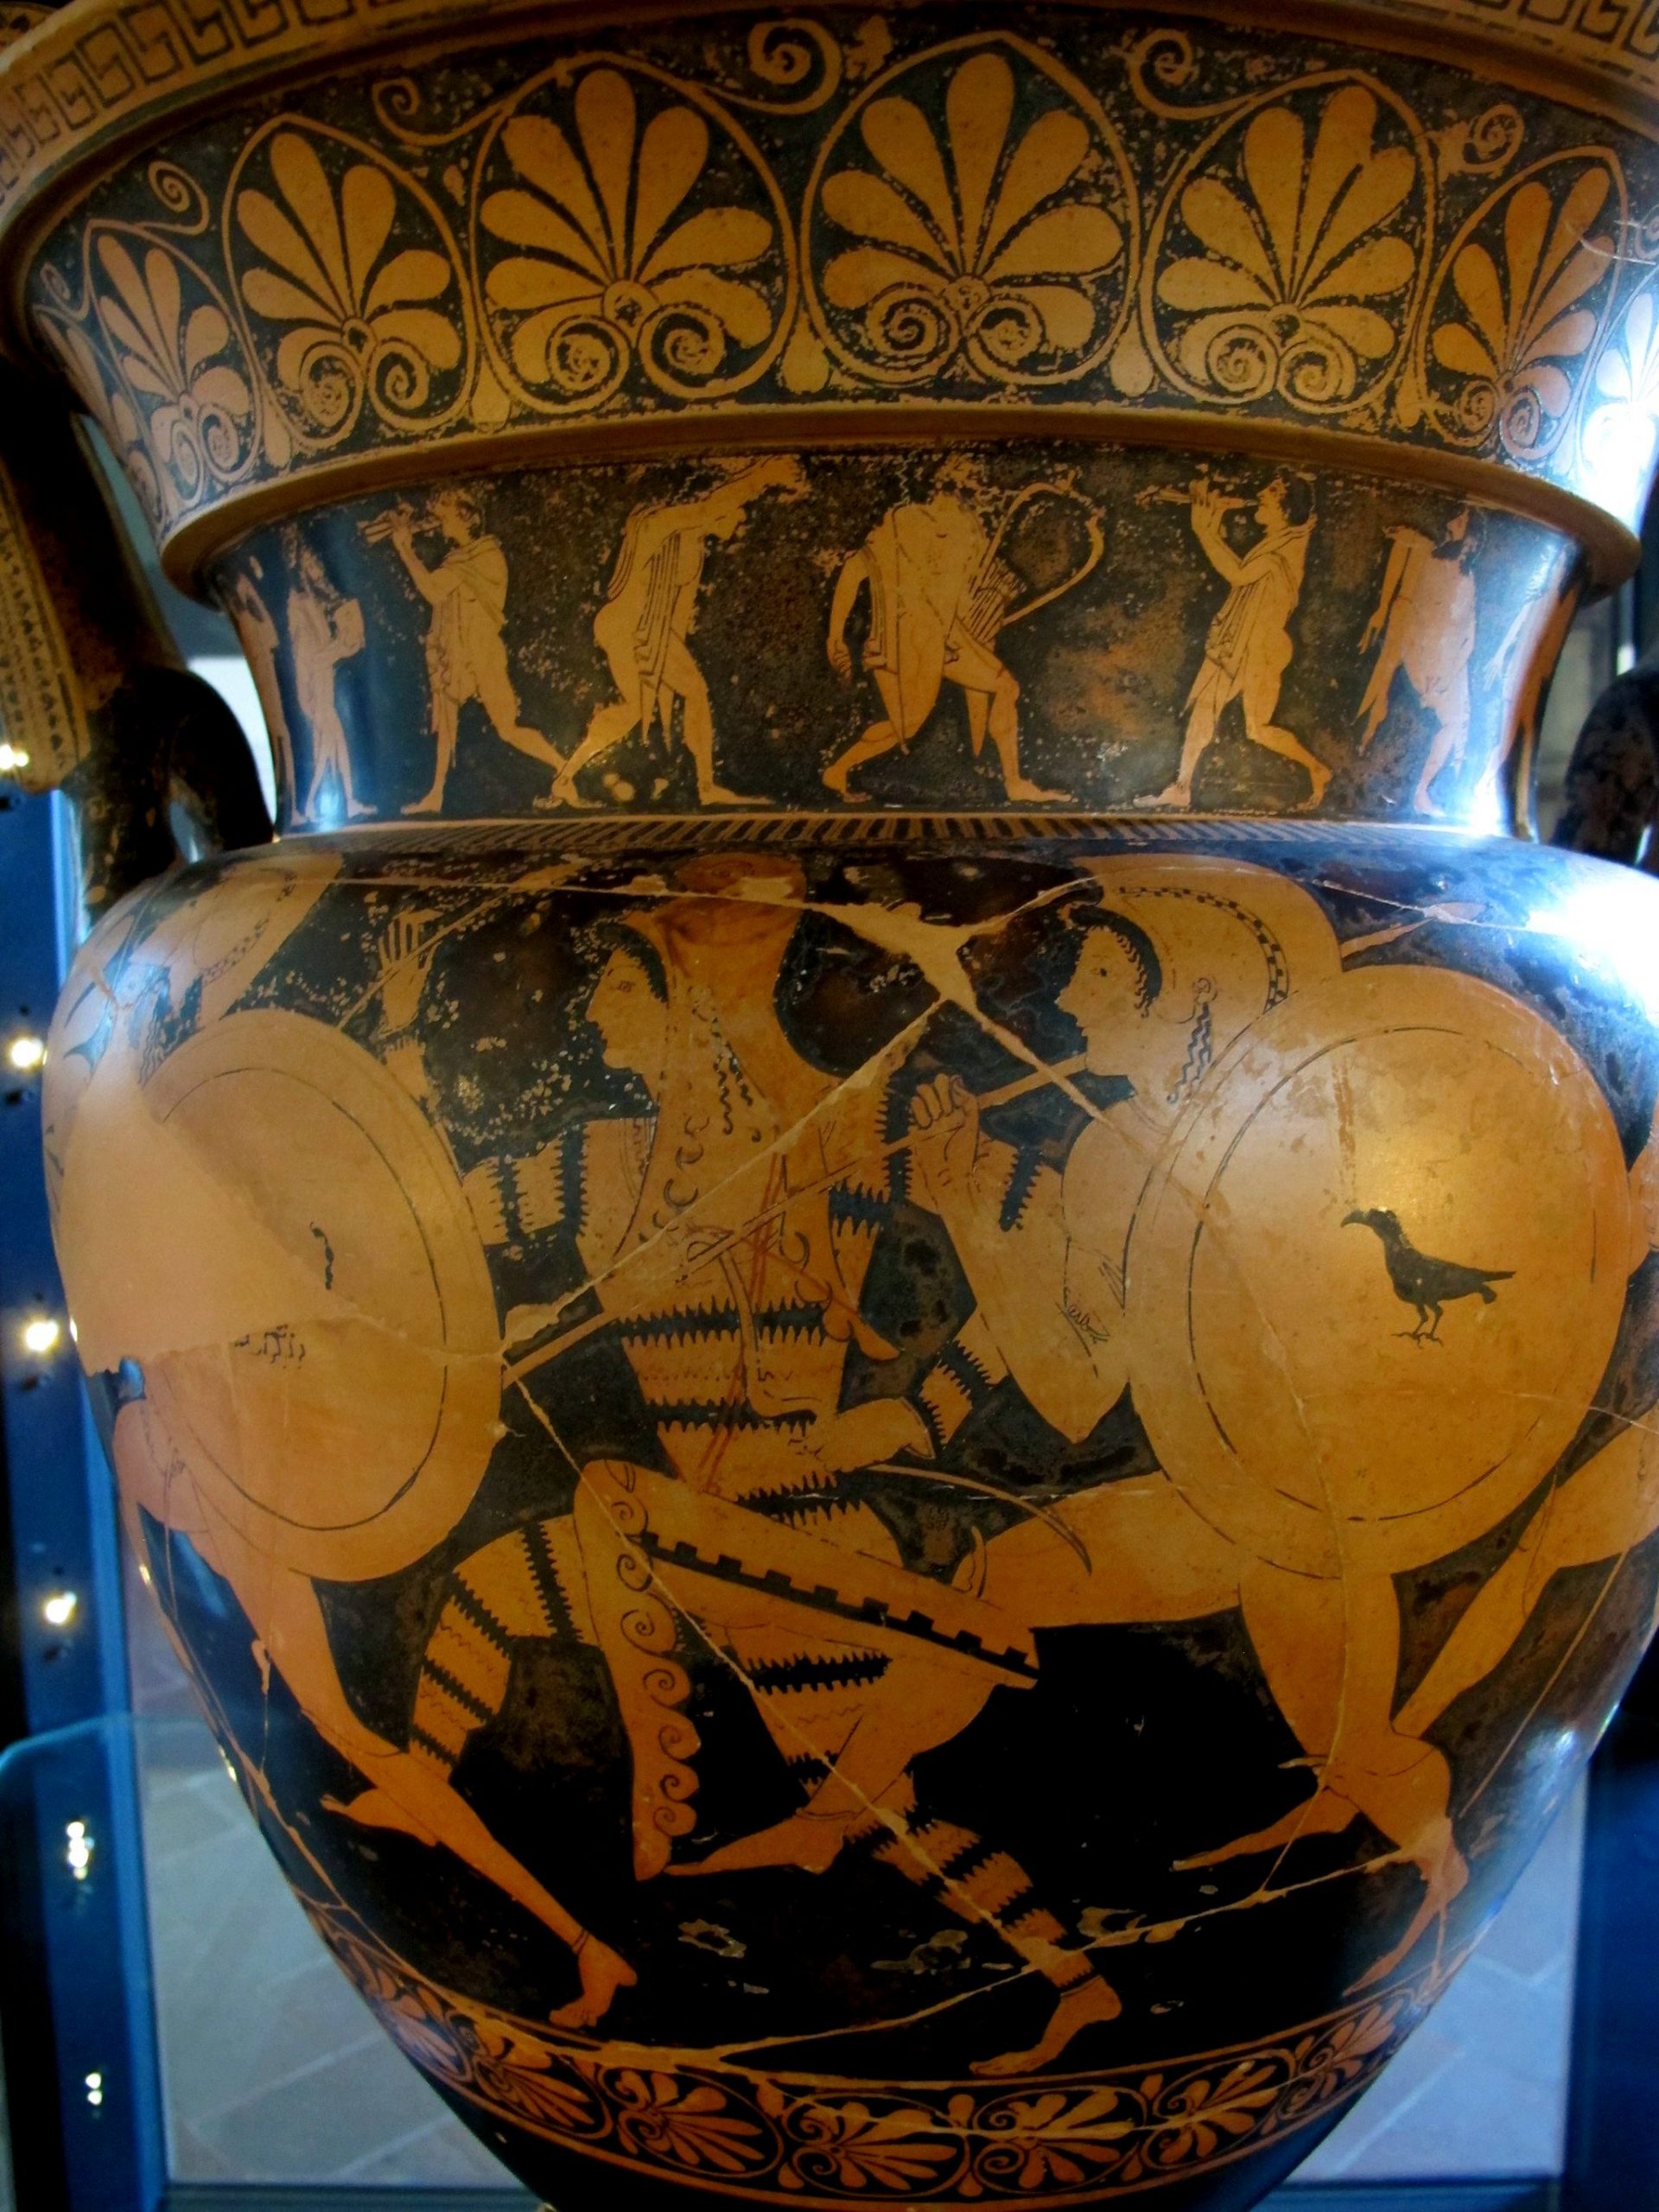 Three figures running in procession. The centre figure is an Amazon, wearing a phrygian cap and tiger-stripe body suit. The other two are Greek warriors, nude with helms and shields.